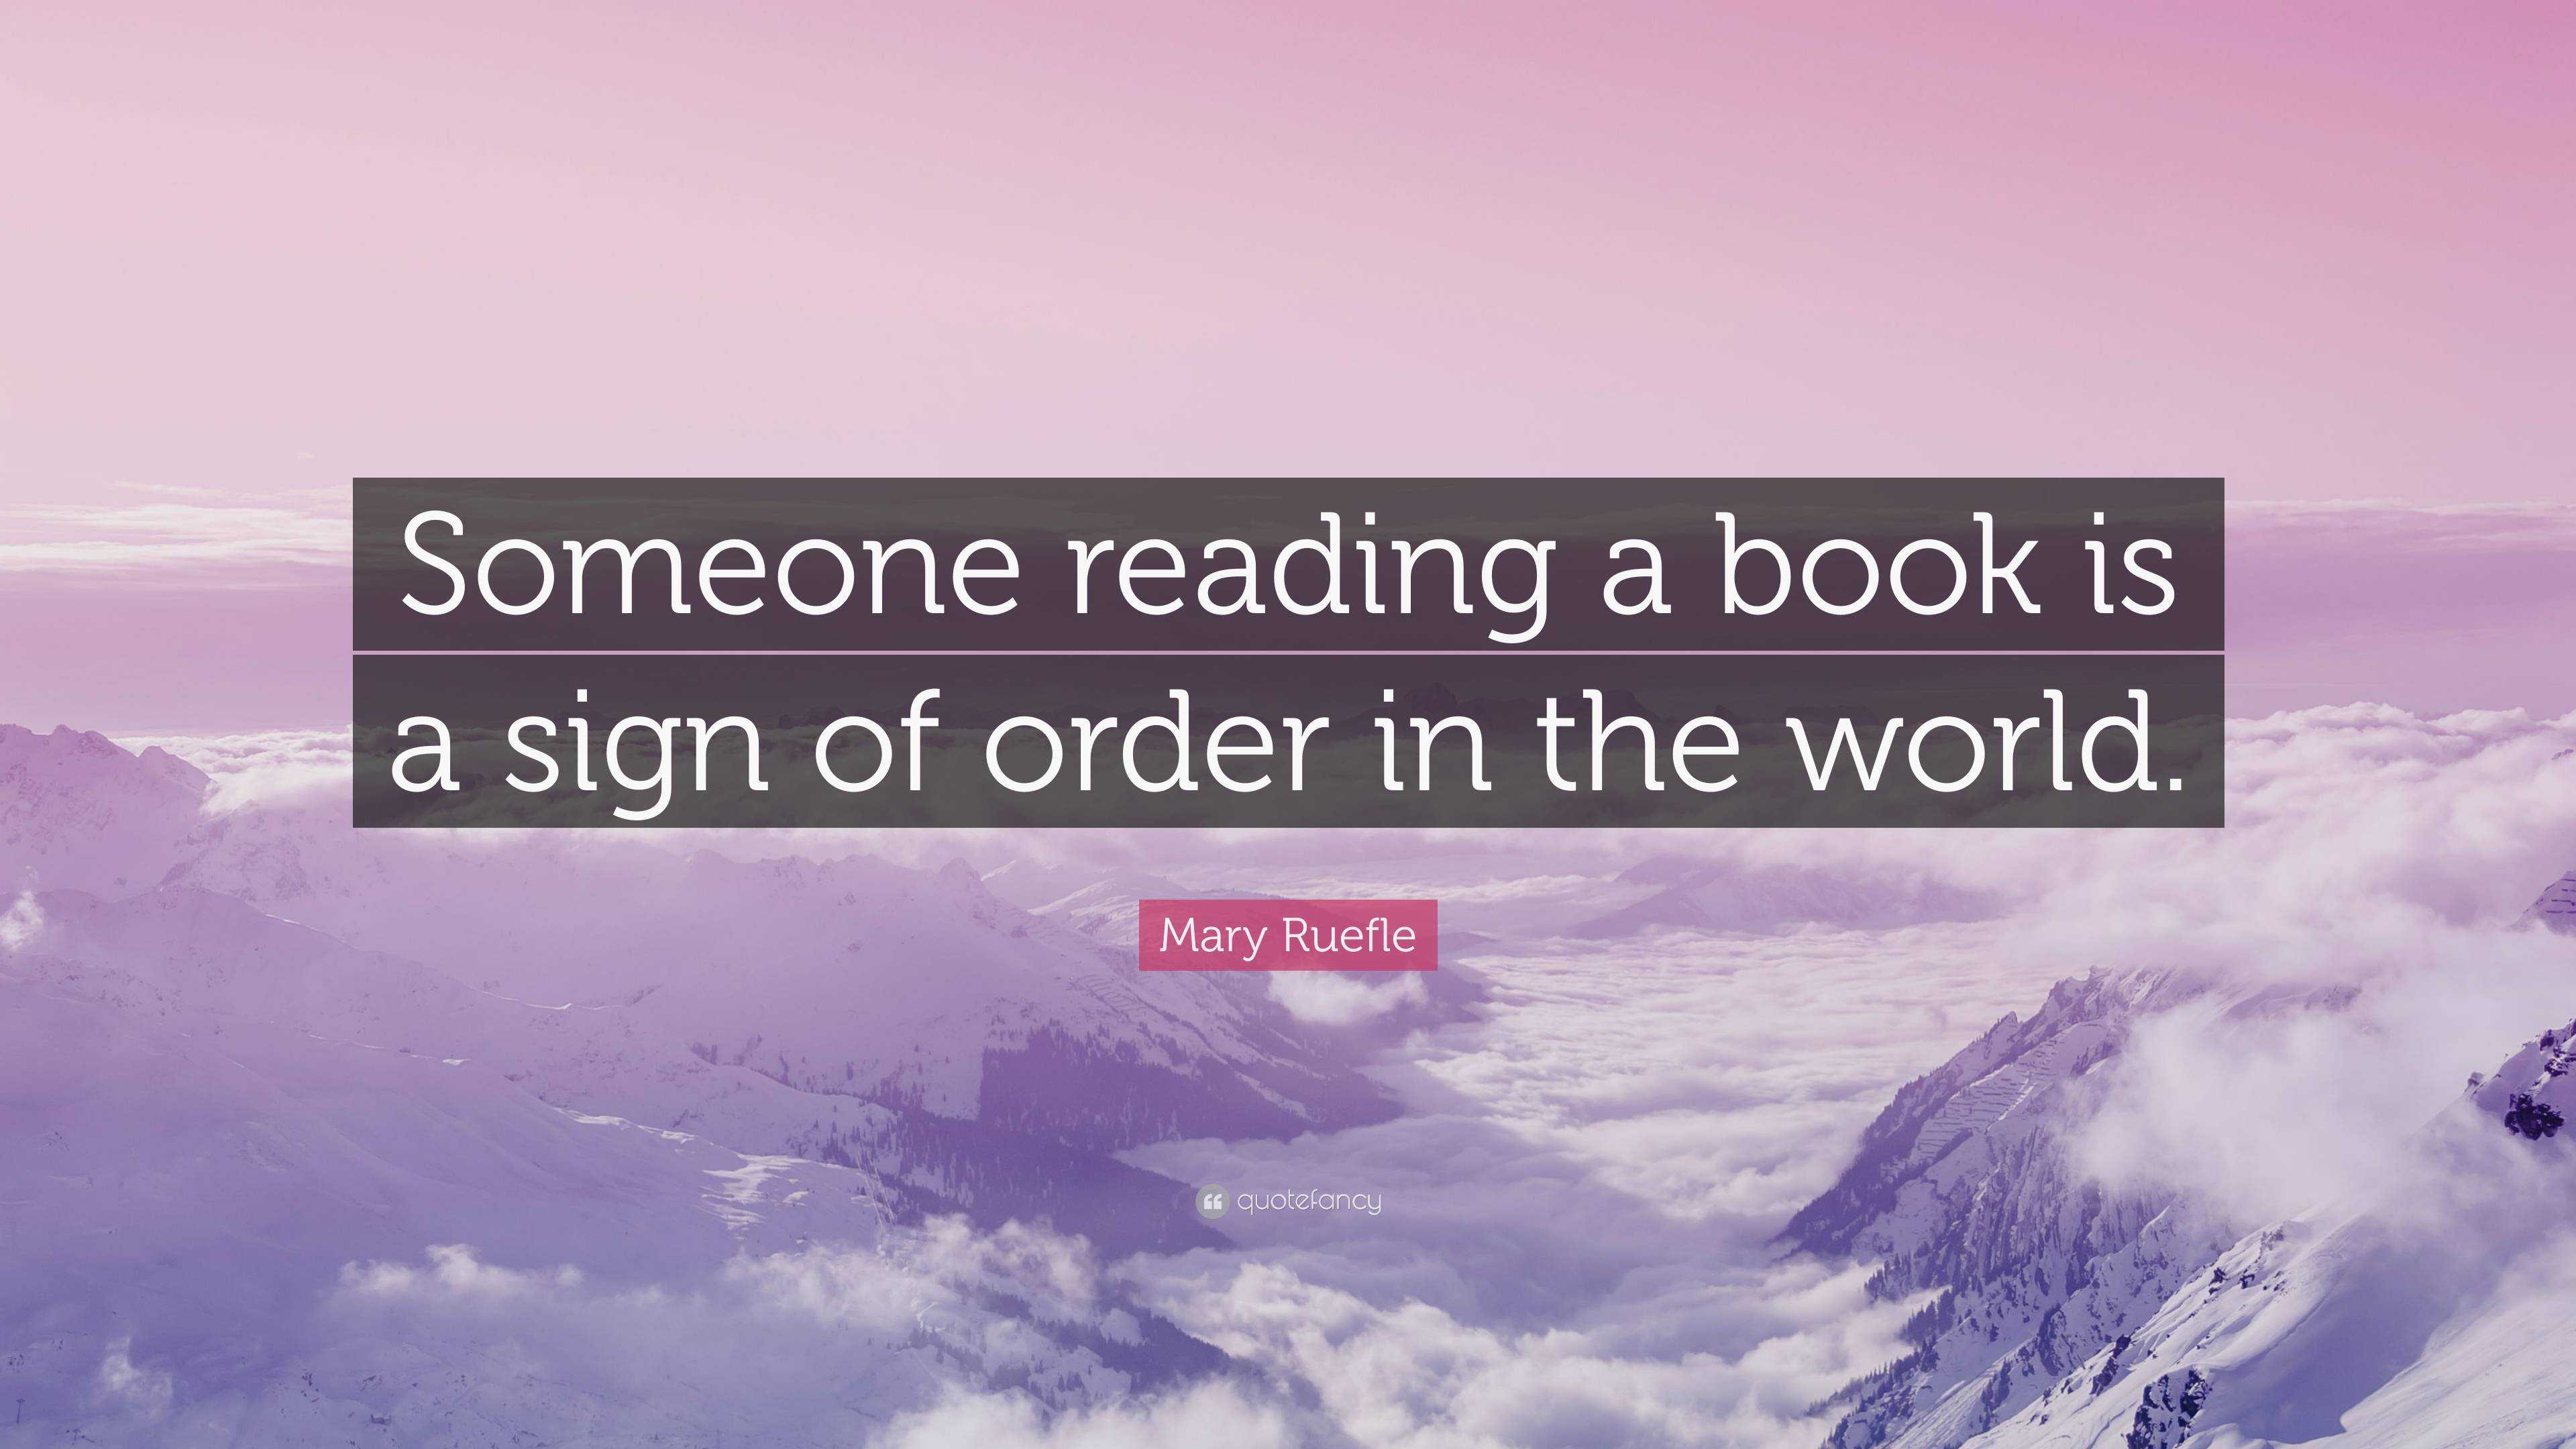 Mary Ruefle Quote: “Someone reading a book is a sign of order in the ...